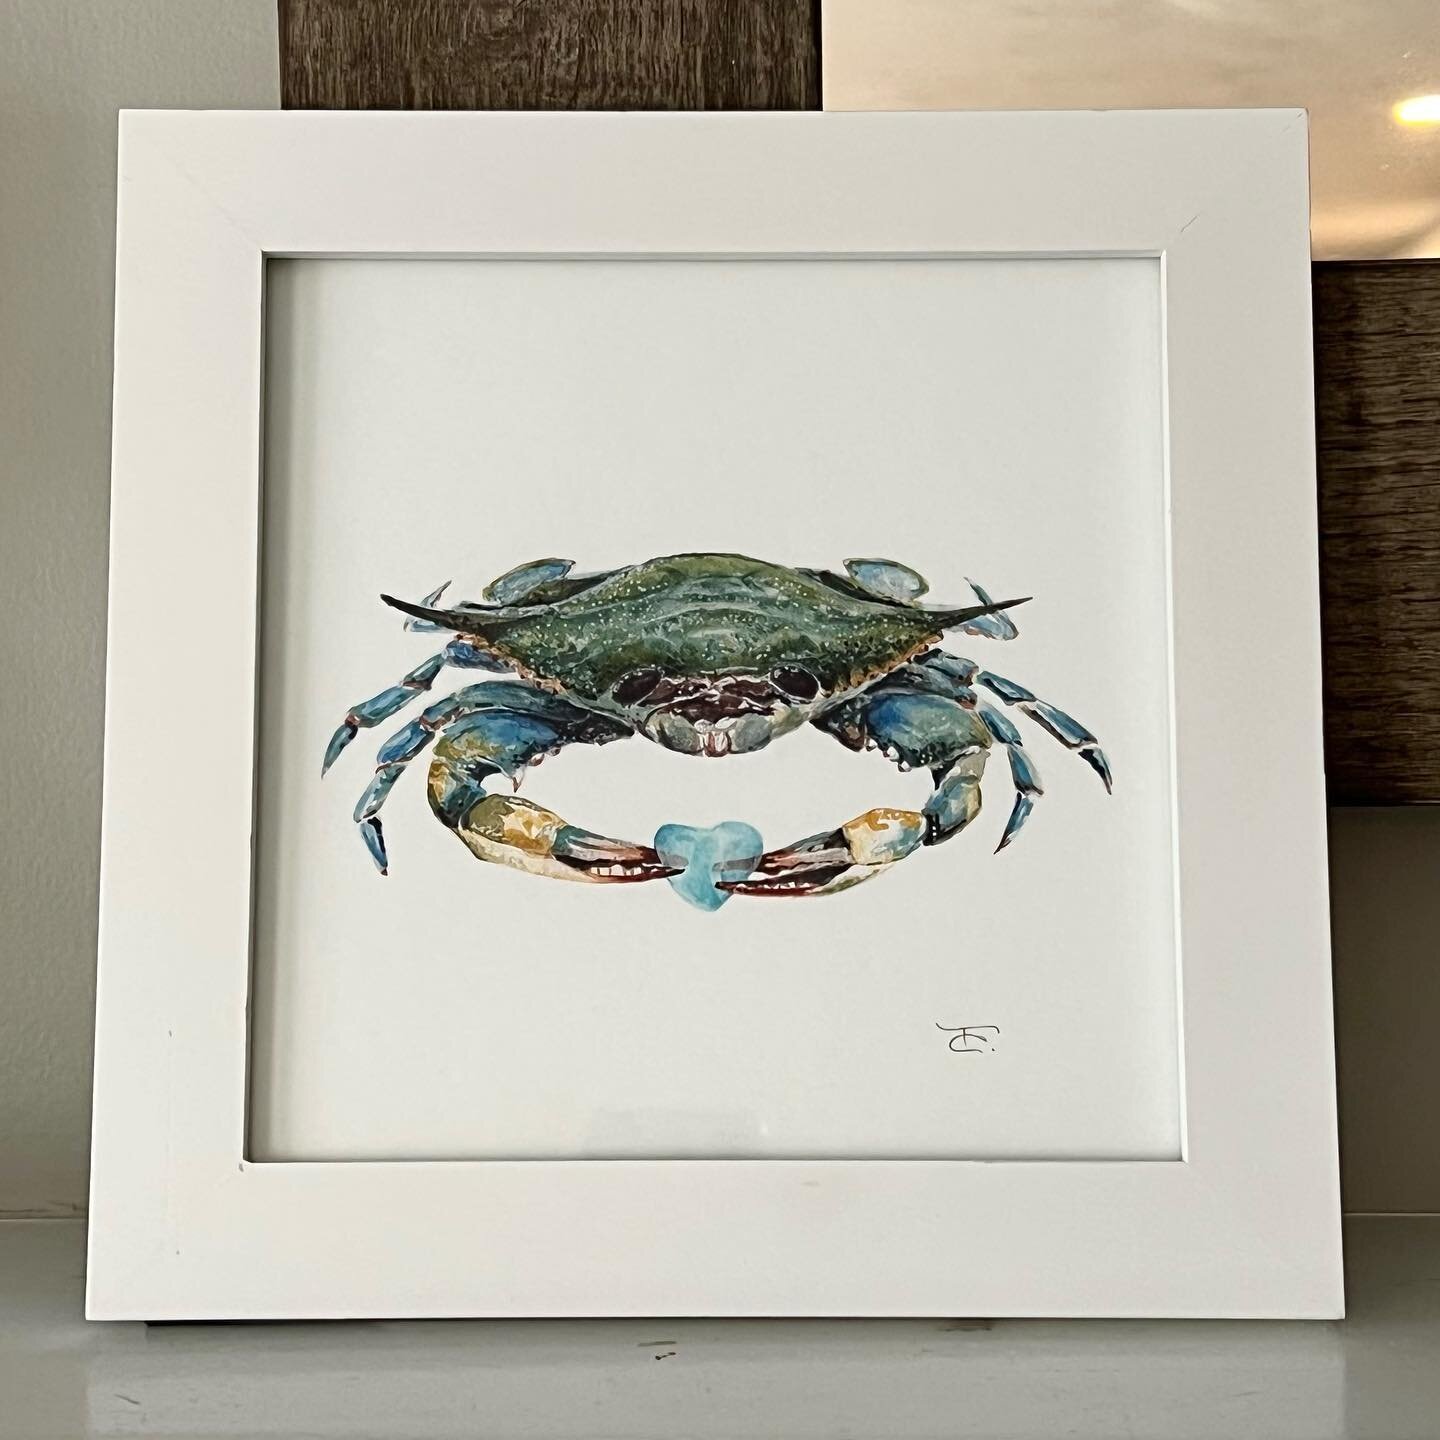 My little blue crab got a sweet little accessory 💙 This framed fine art print with a hand painted sea glass heart will be at @nativescituate for their Works of the Heart event starting this Friday the 3rd (through Feb  11th). I love local shops and 